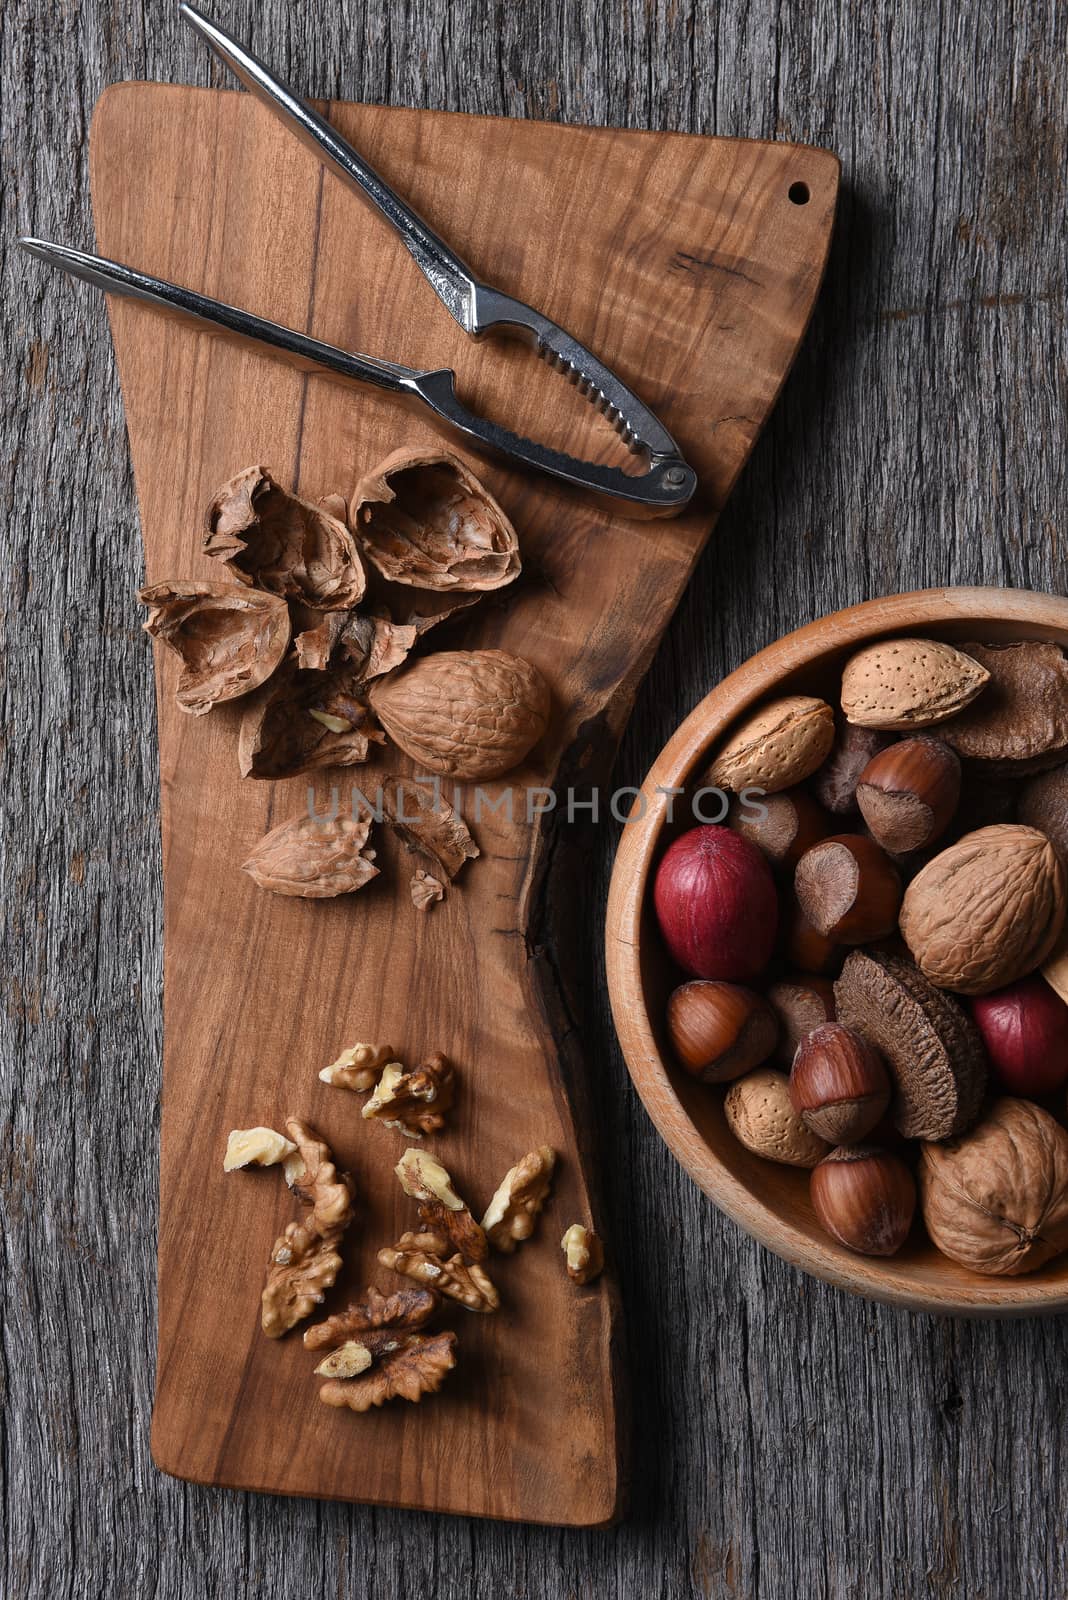 Cracked walnuts and nutcracker on a cutting board with a bowl of mixed whole shelled nuts.